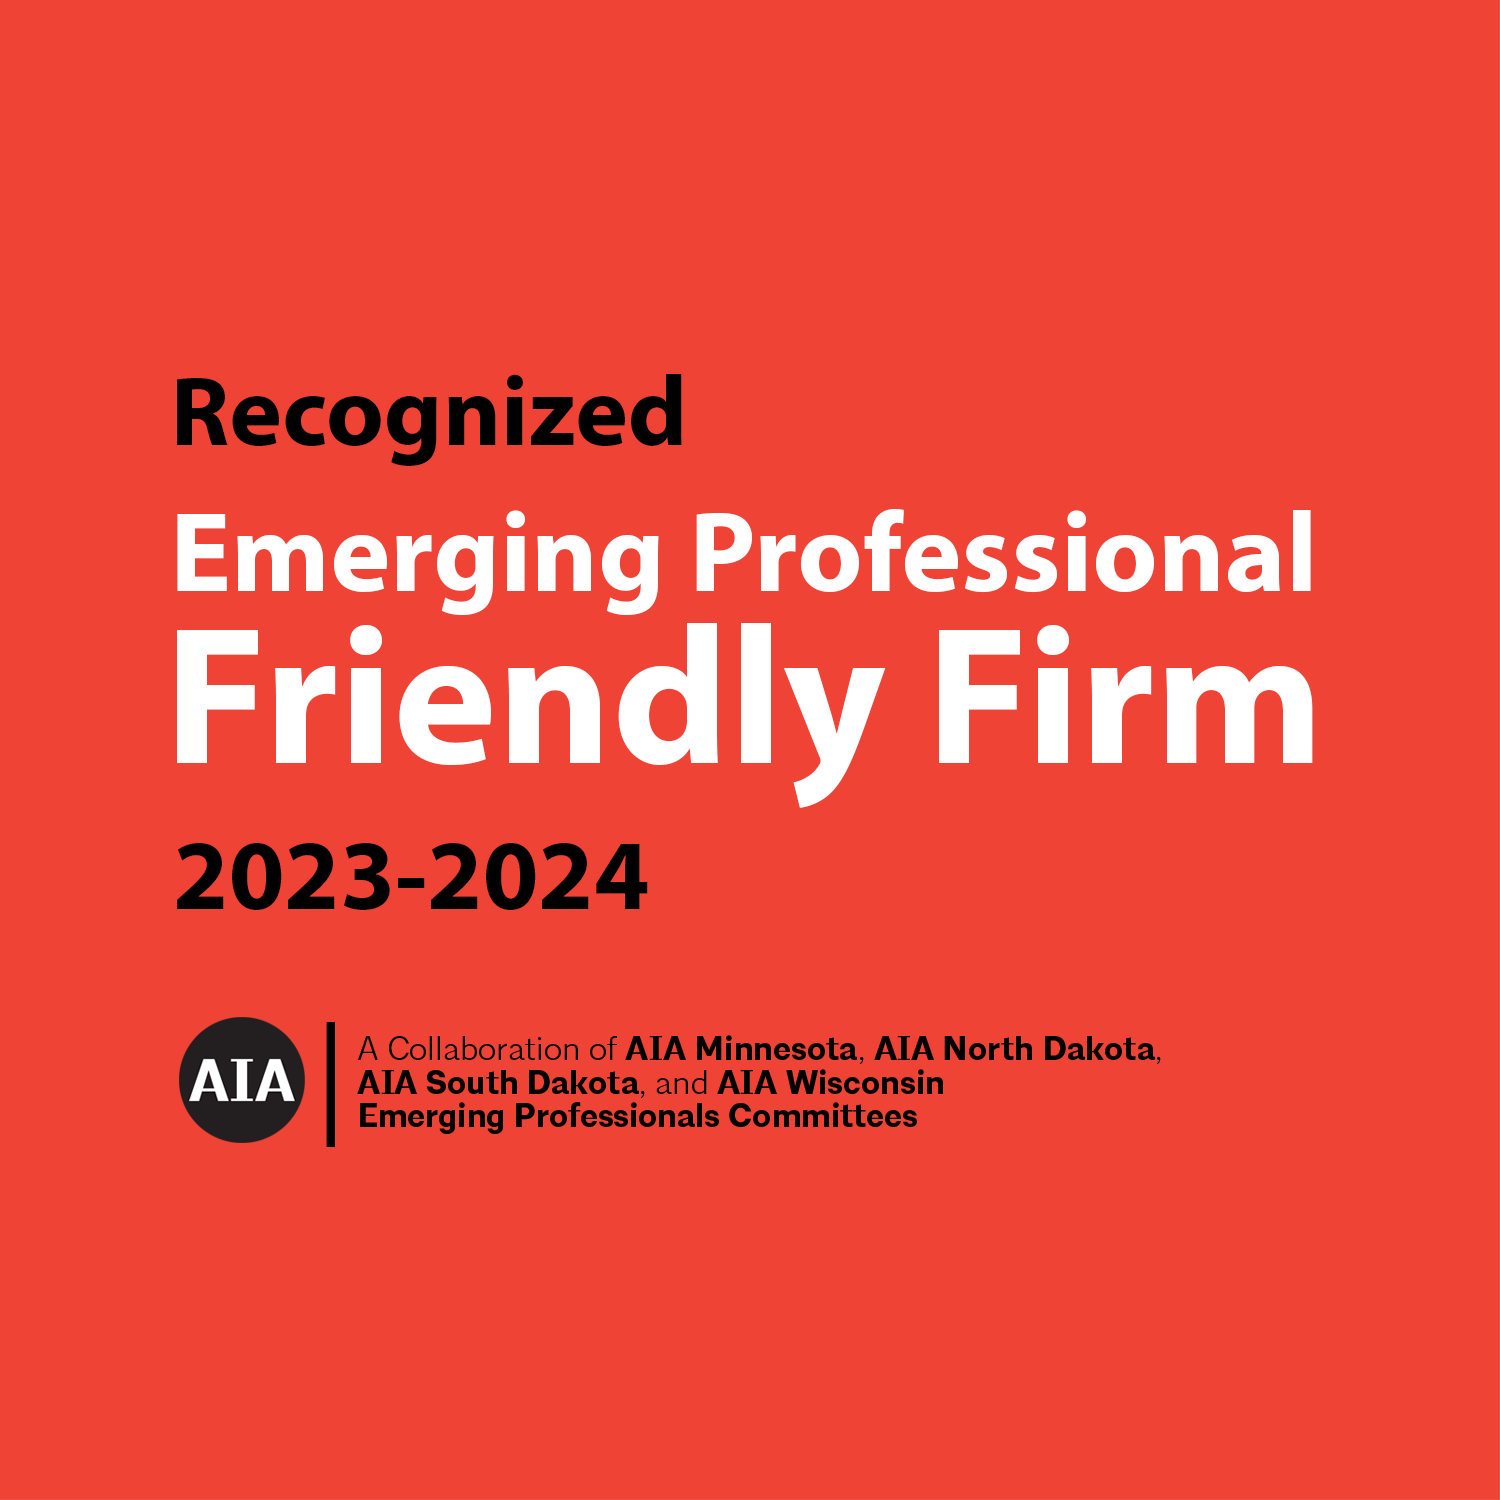 Architecture Incorporated Recognized as Emerging Professional Friendly Firm